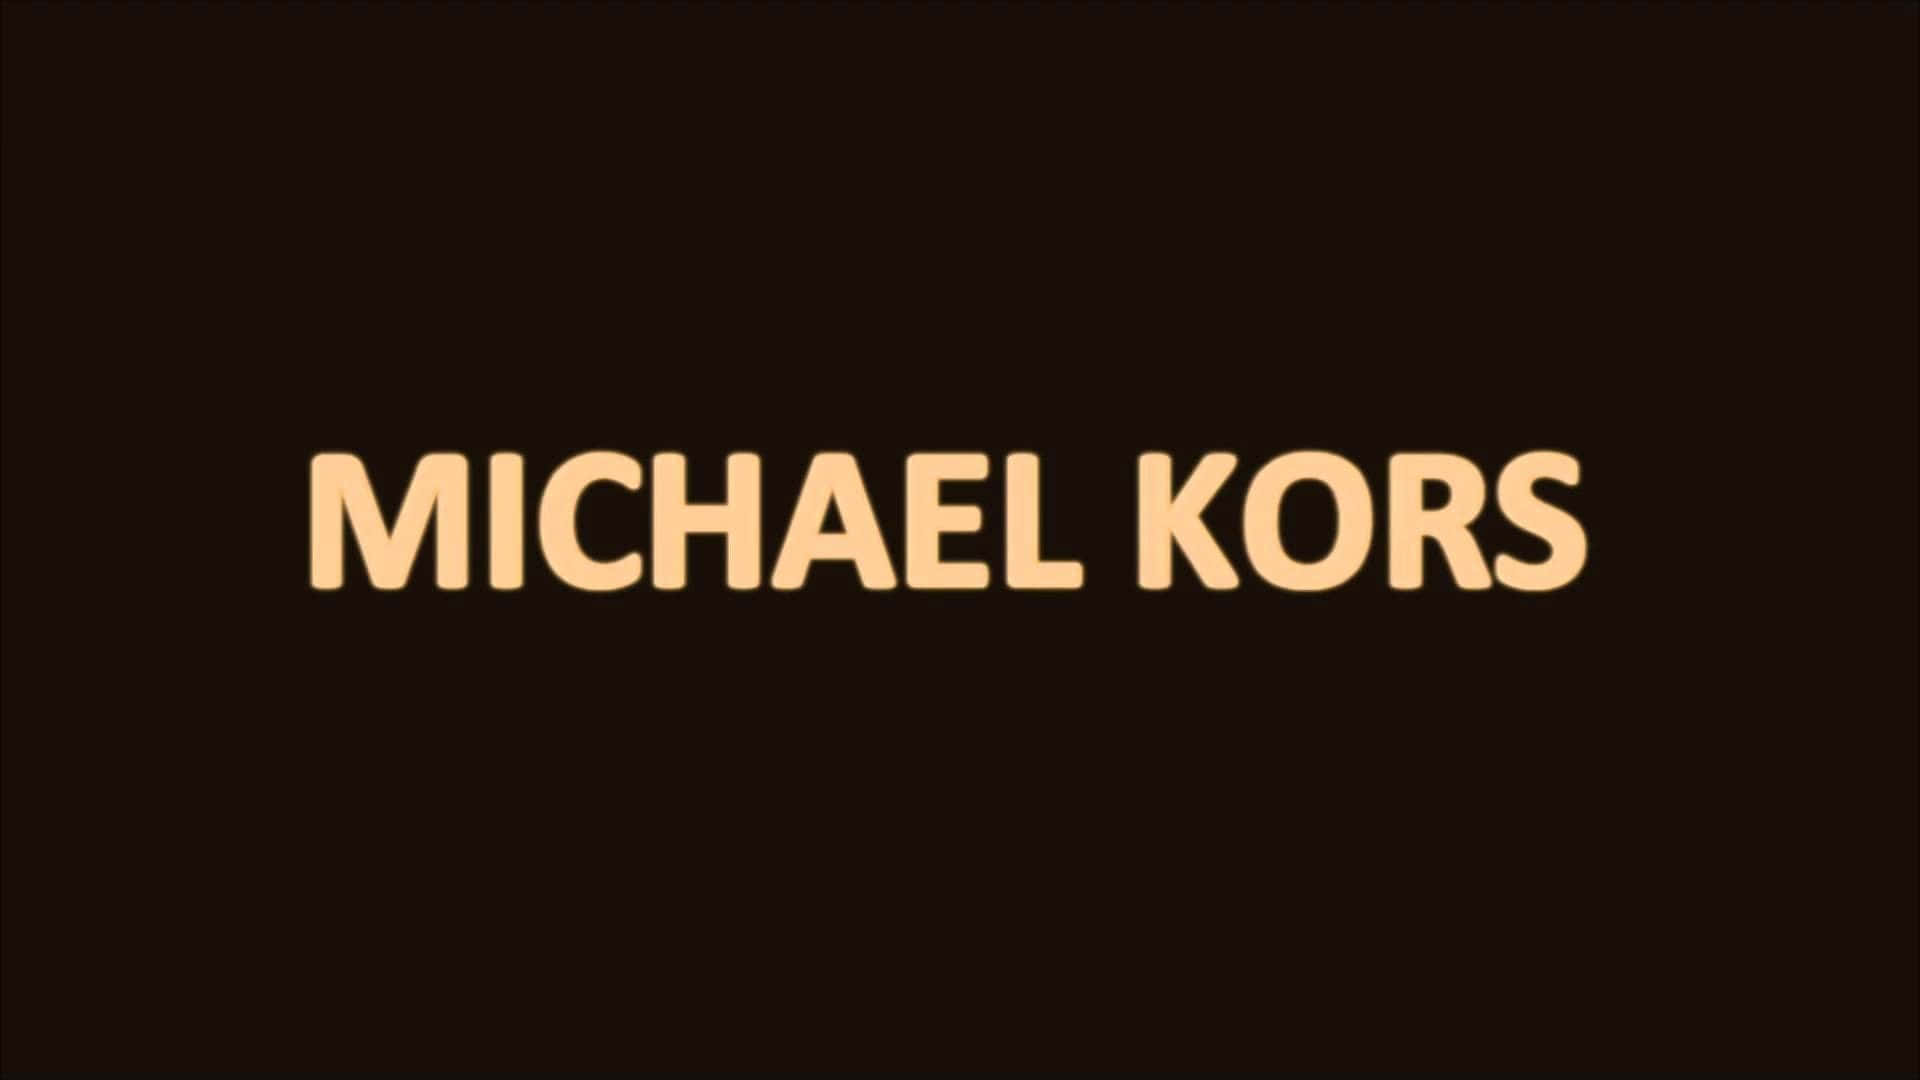 Get ready to feel good and look great with Michael Kors